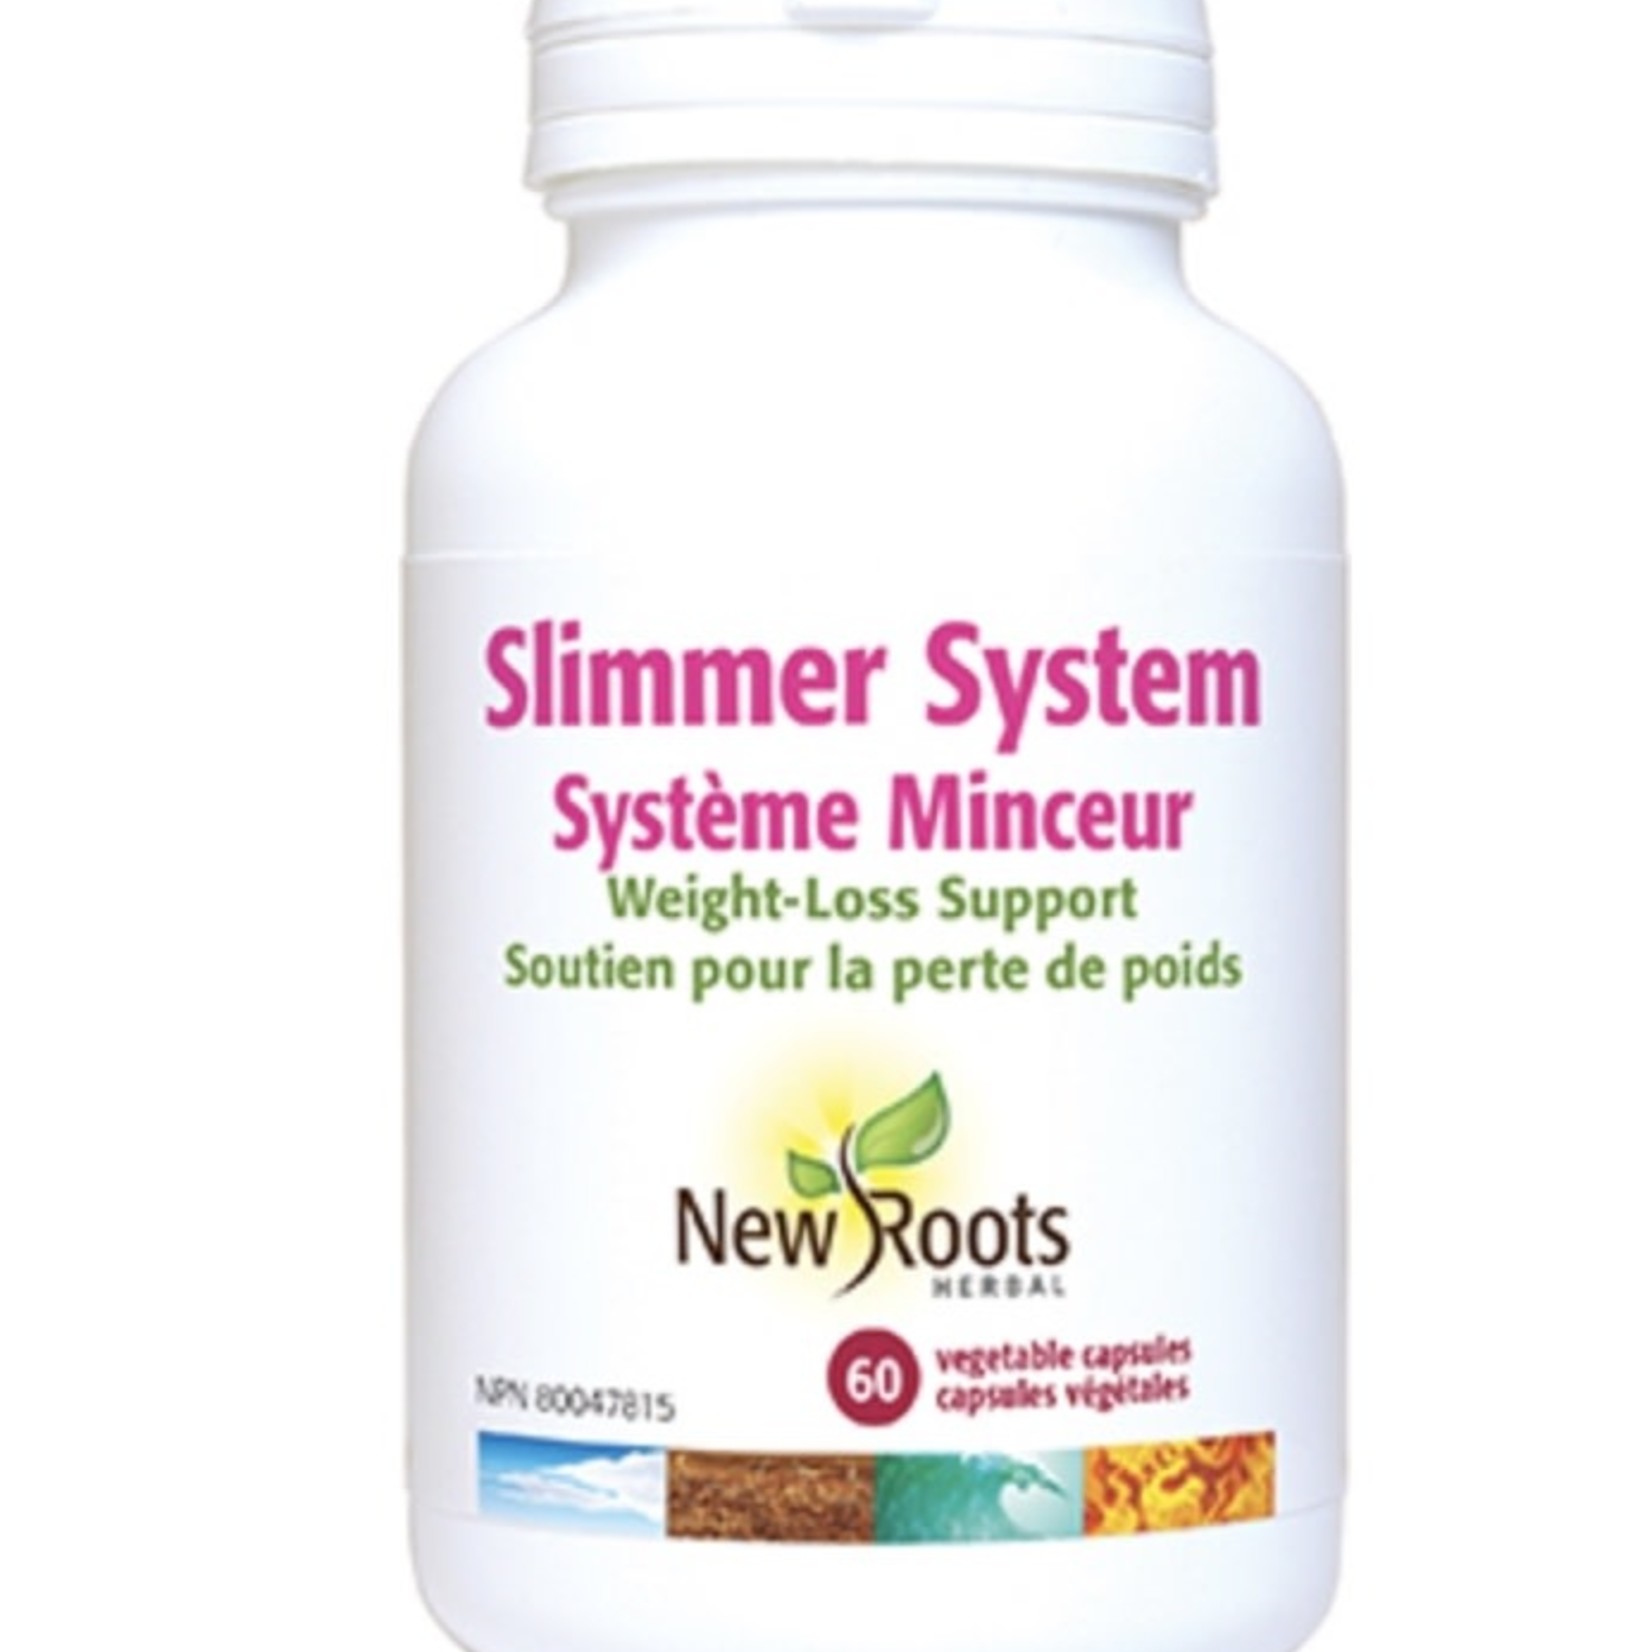 New Roots New Roots Slimmer System 60 caps